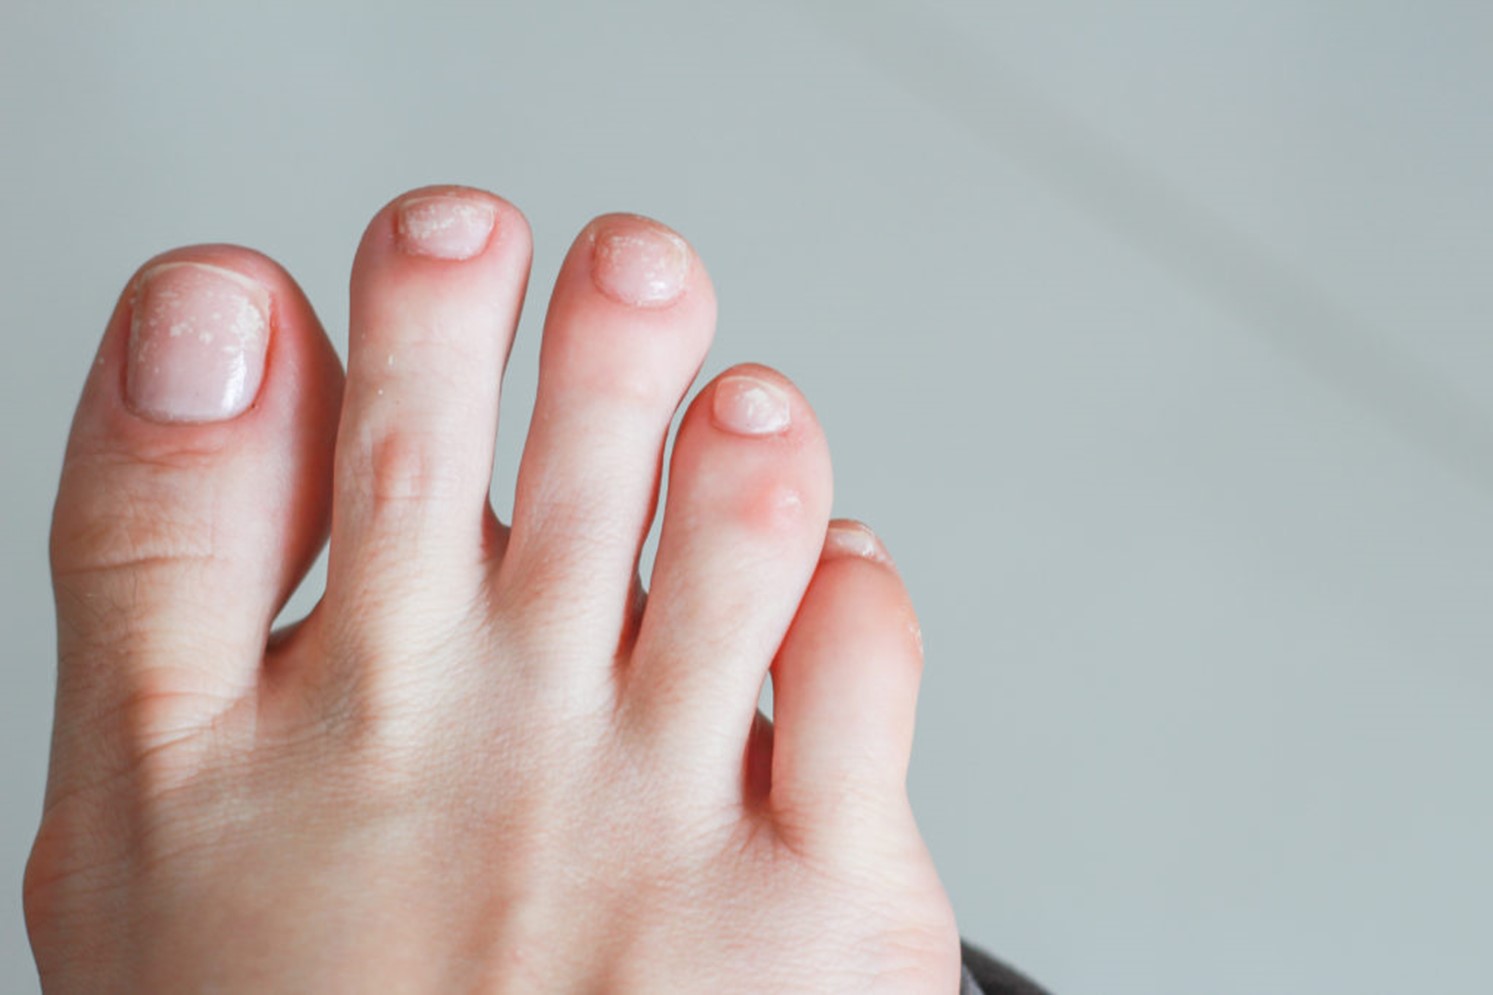 7 Nail Signs of Health Problems